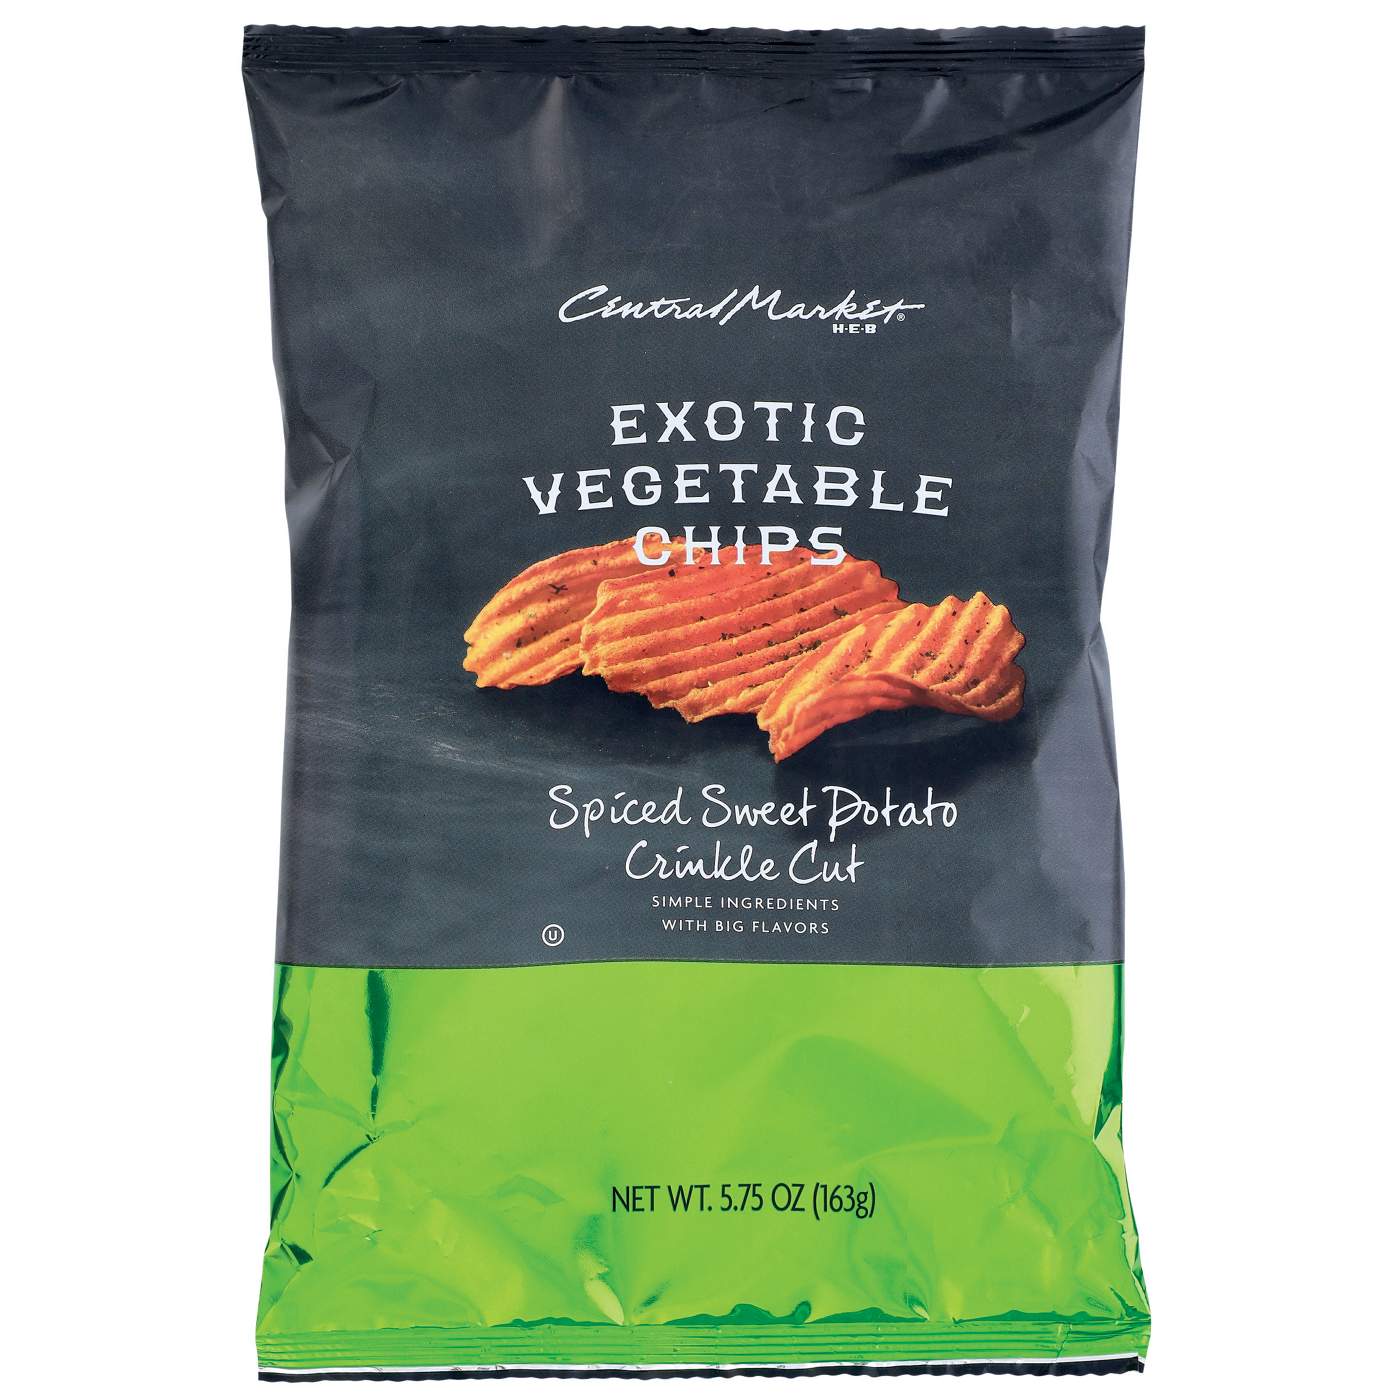 Central Market Spiced Sweet Potato Crinkle Cut Exotic Vegetable Chips; image 1 of 2